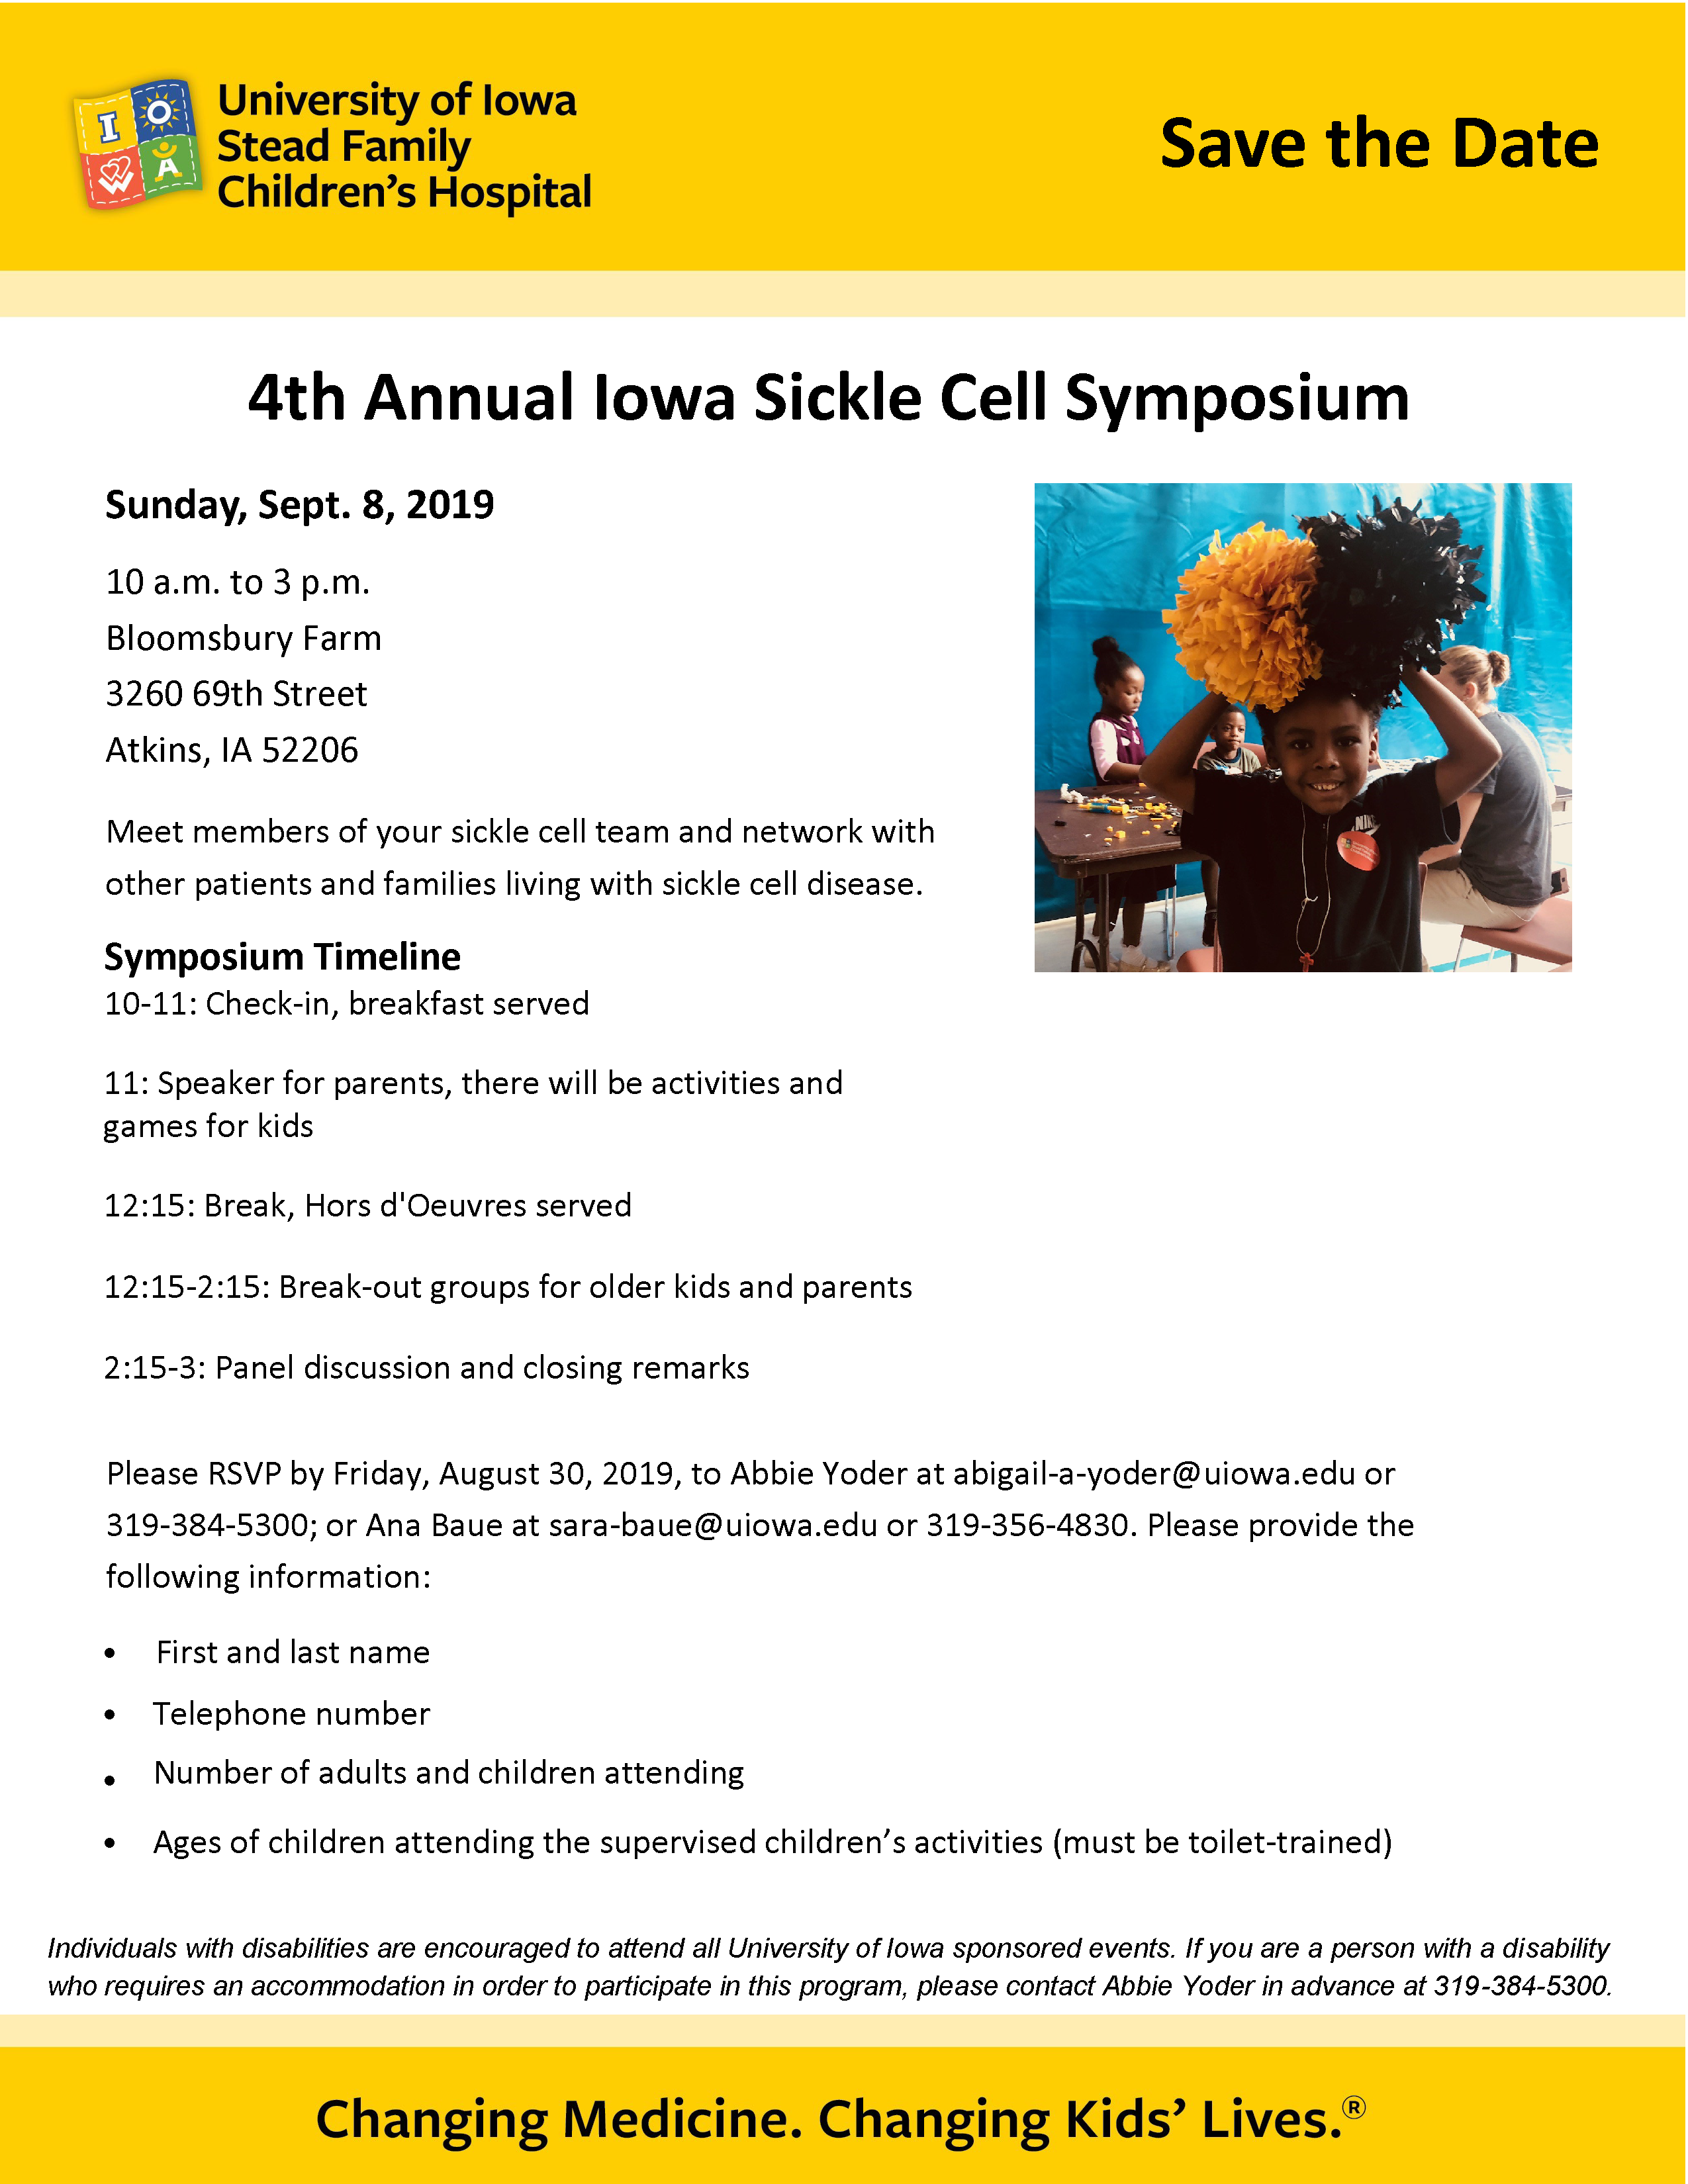 4th Annual Iowa Sickle Cell Symposium promotional image